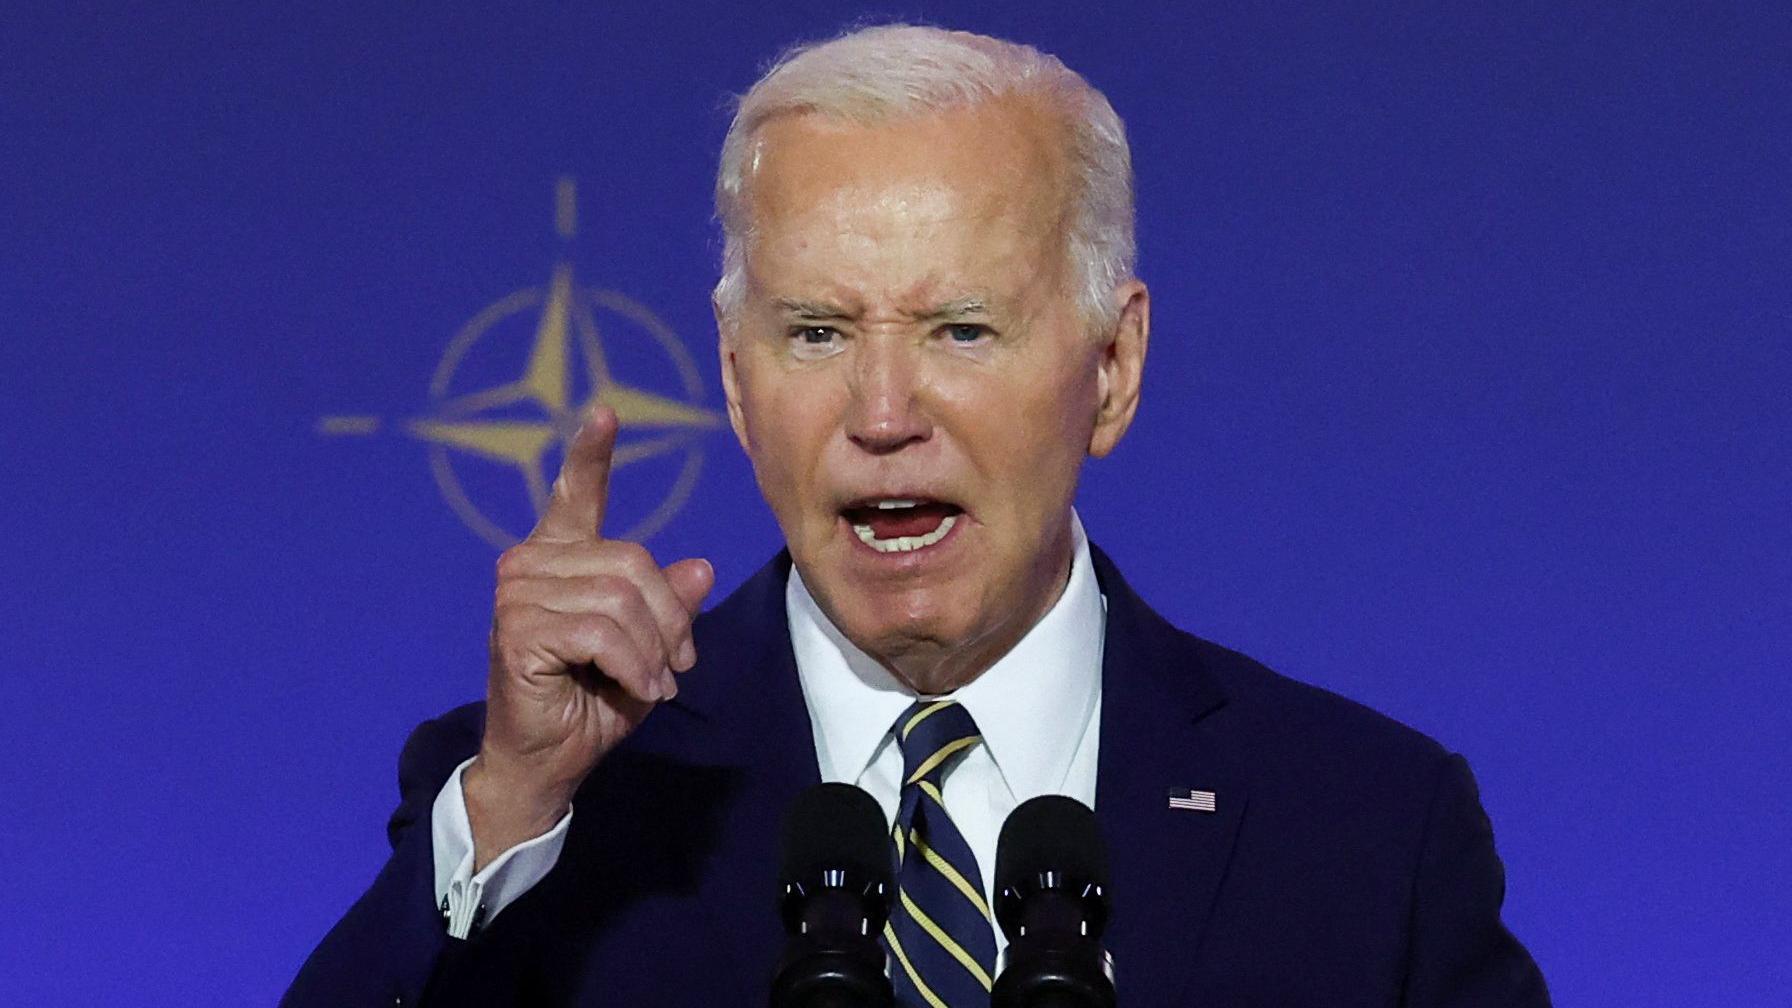 Biden forcefully defends Nato as he hosts summit leaders